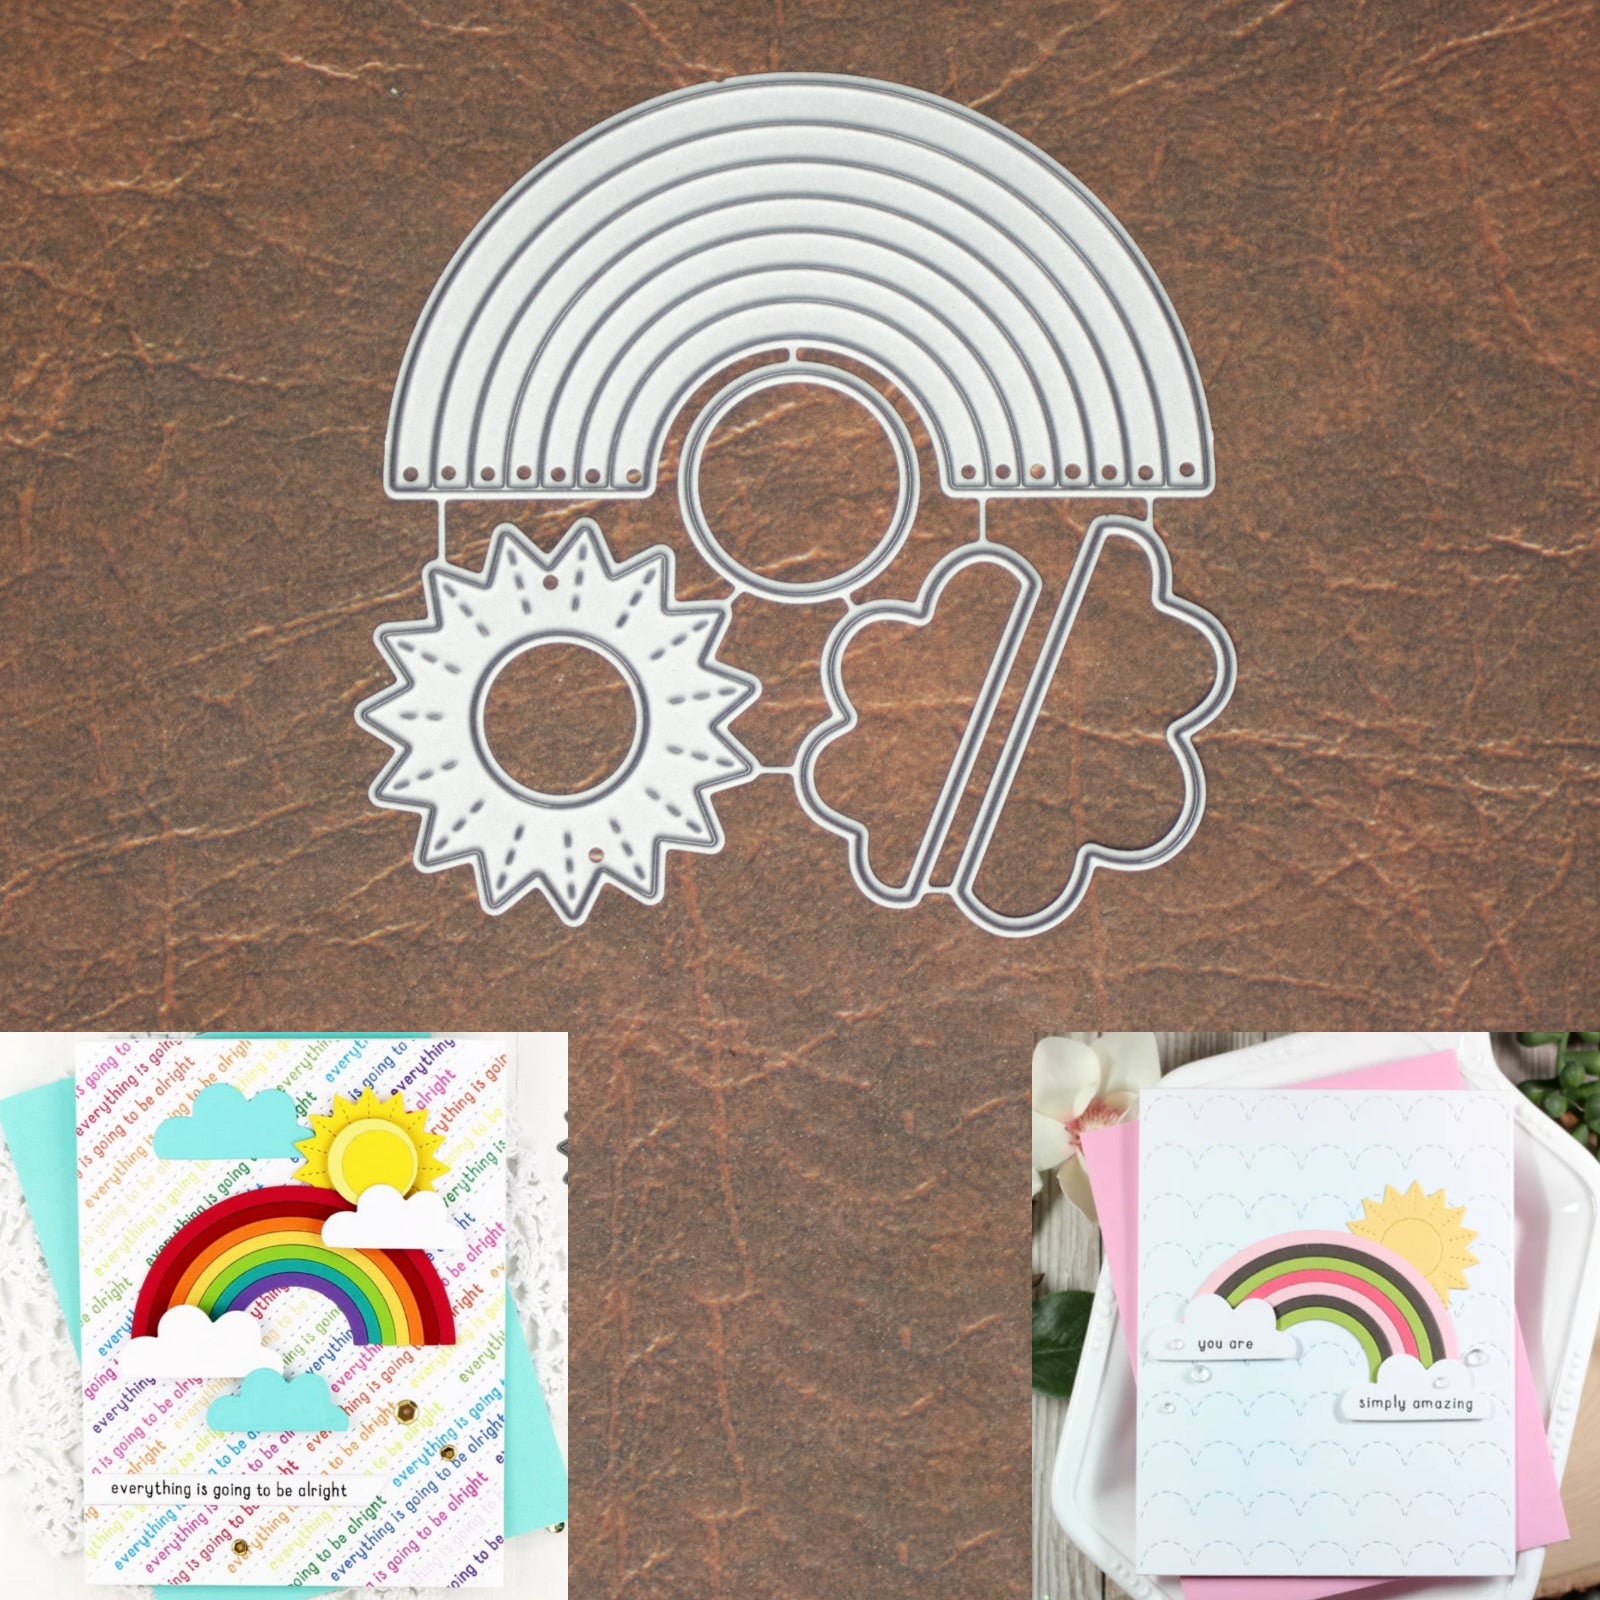 Sunny Weather w Clouds & Rainbow Cutting & Embossing Dies